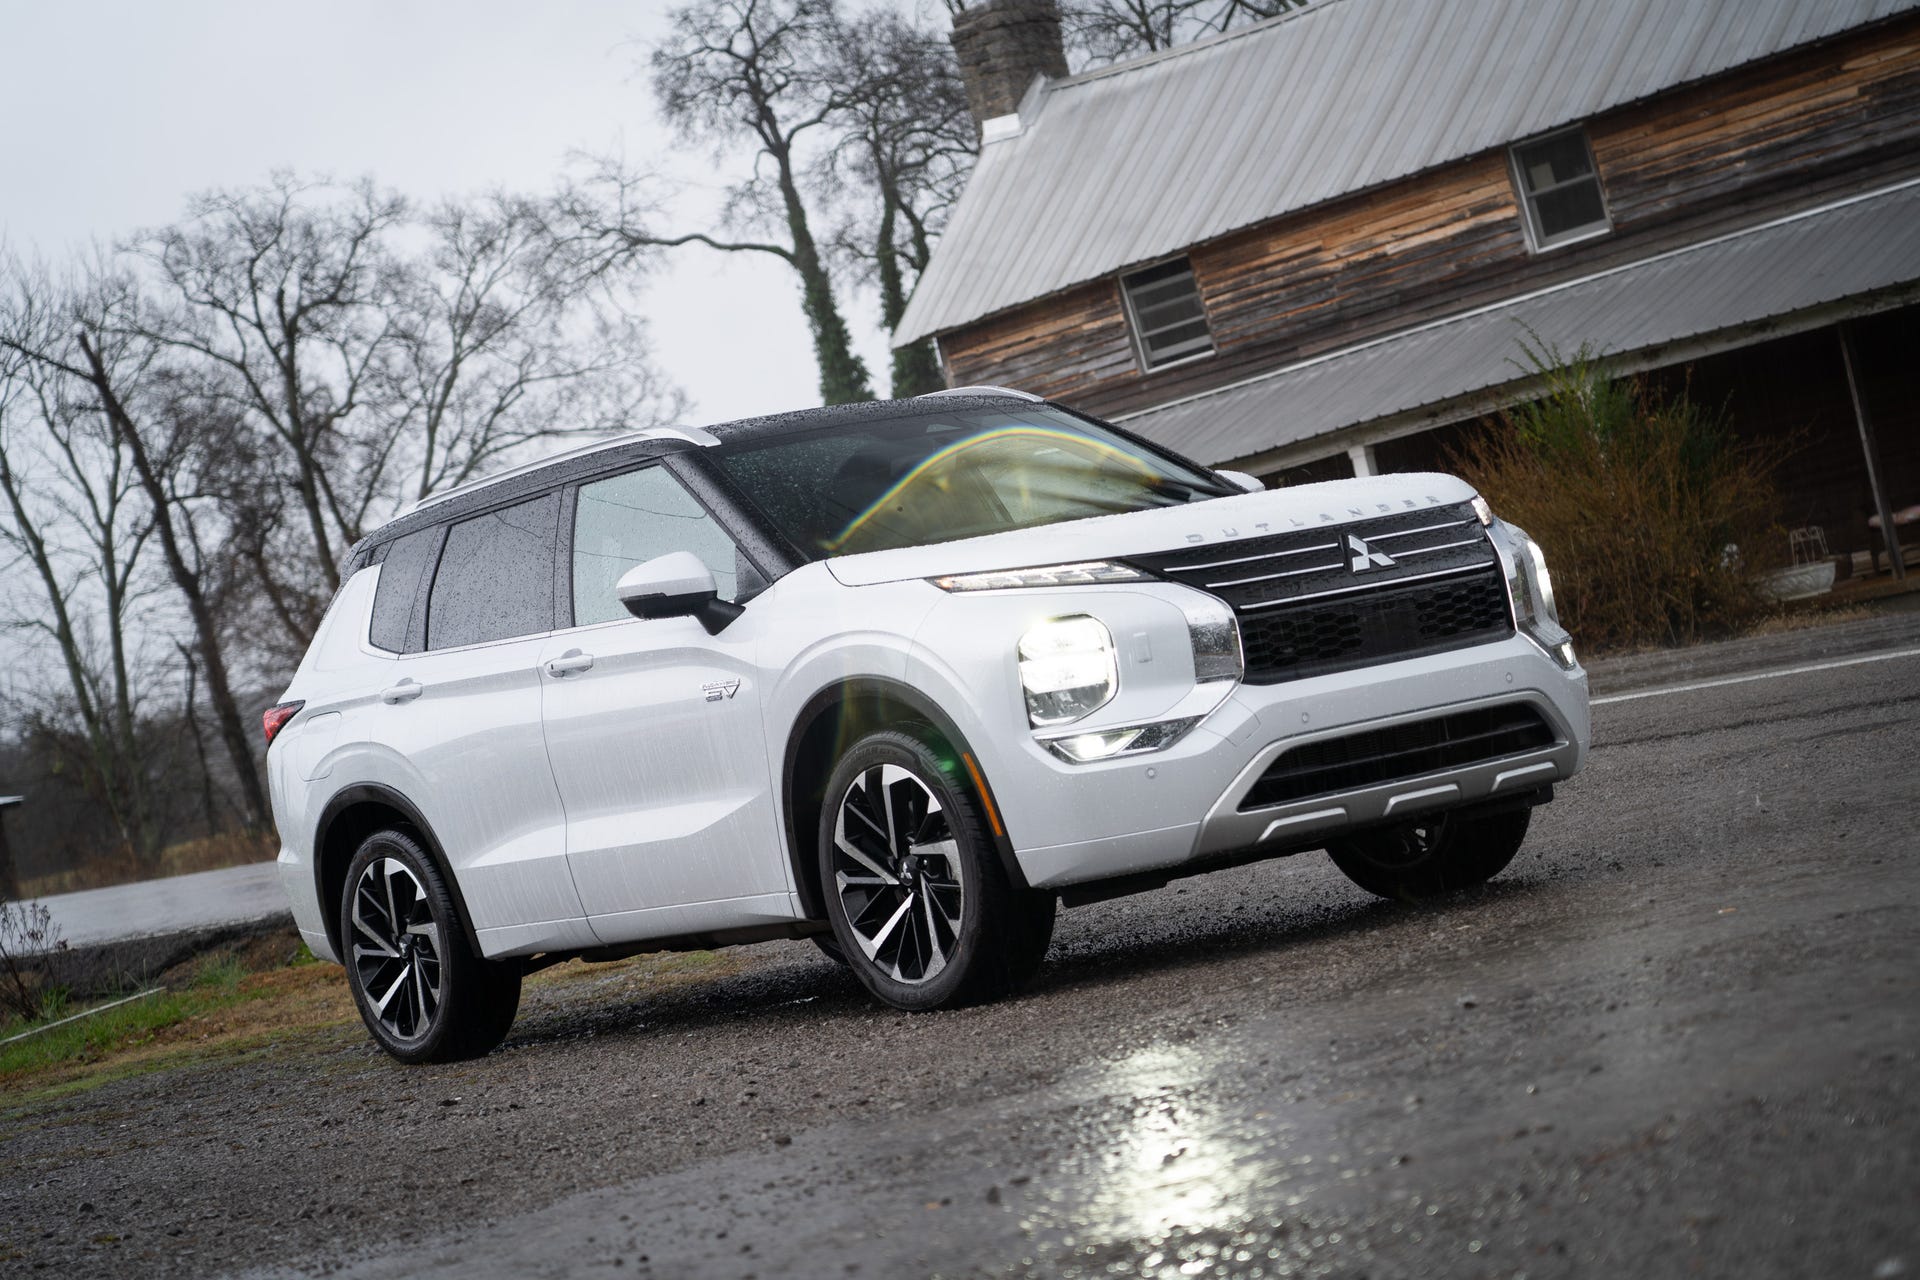 The 2023 Mitsubishi Outlander: new appearance and technology